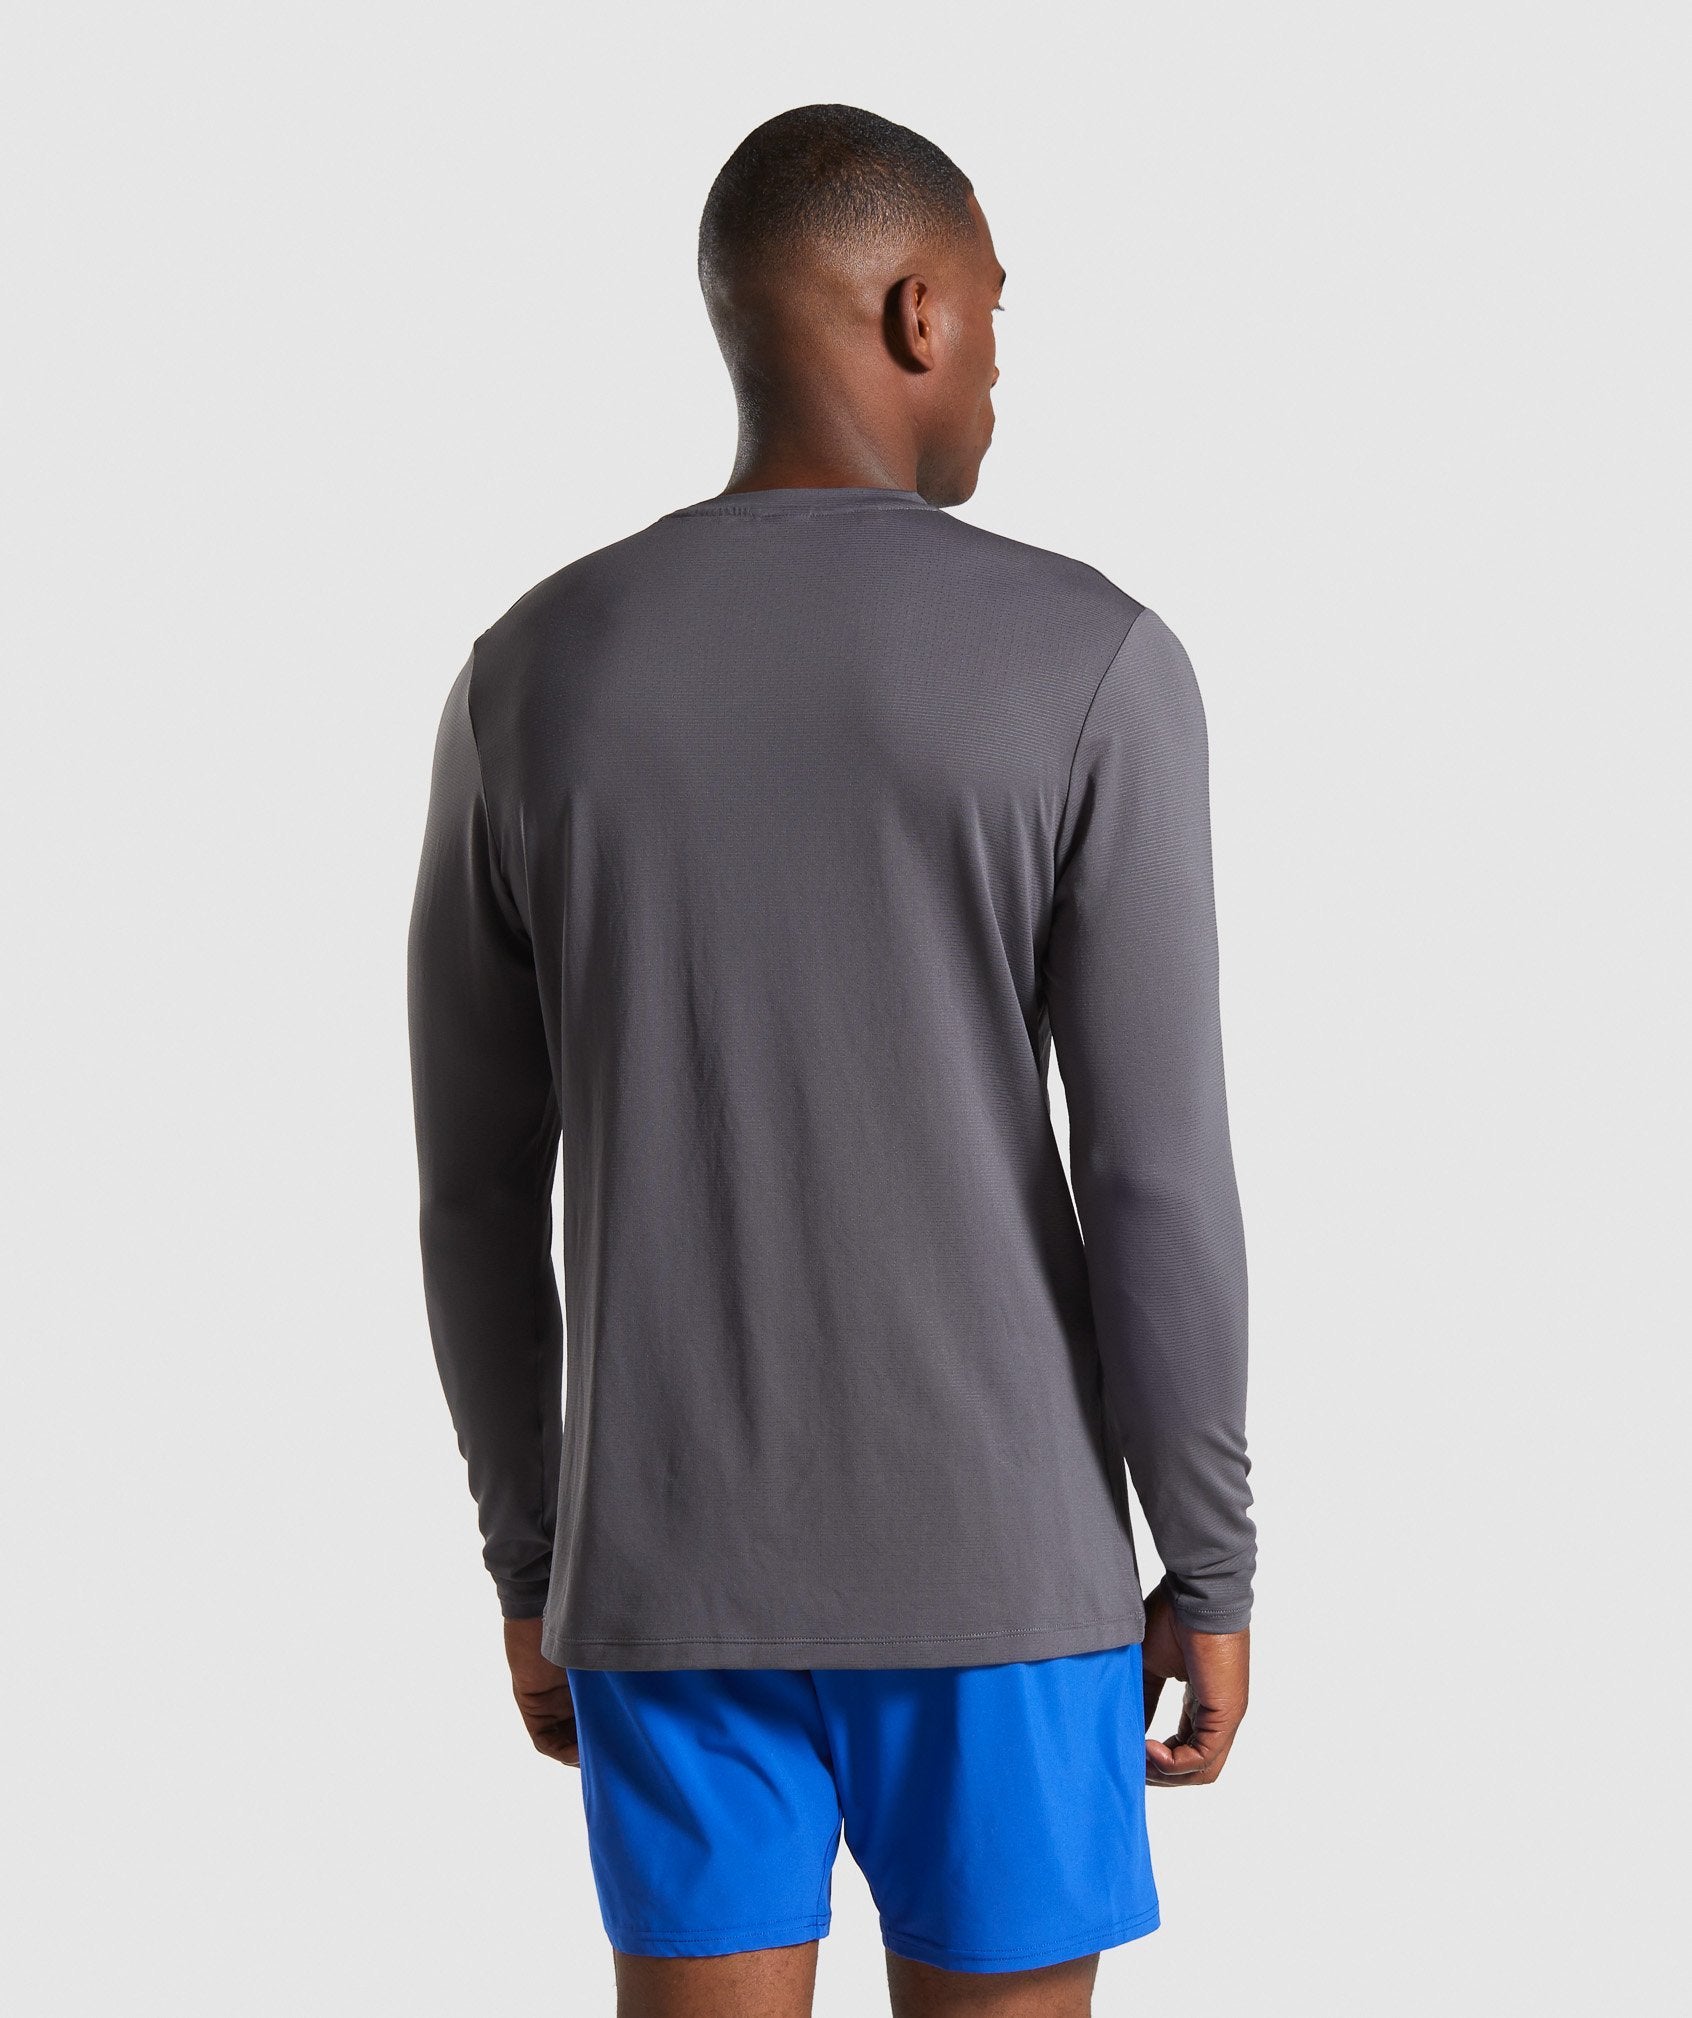 Arrival Long Sleeve T-Shirt in Charcoal